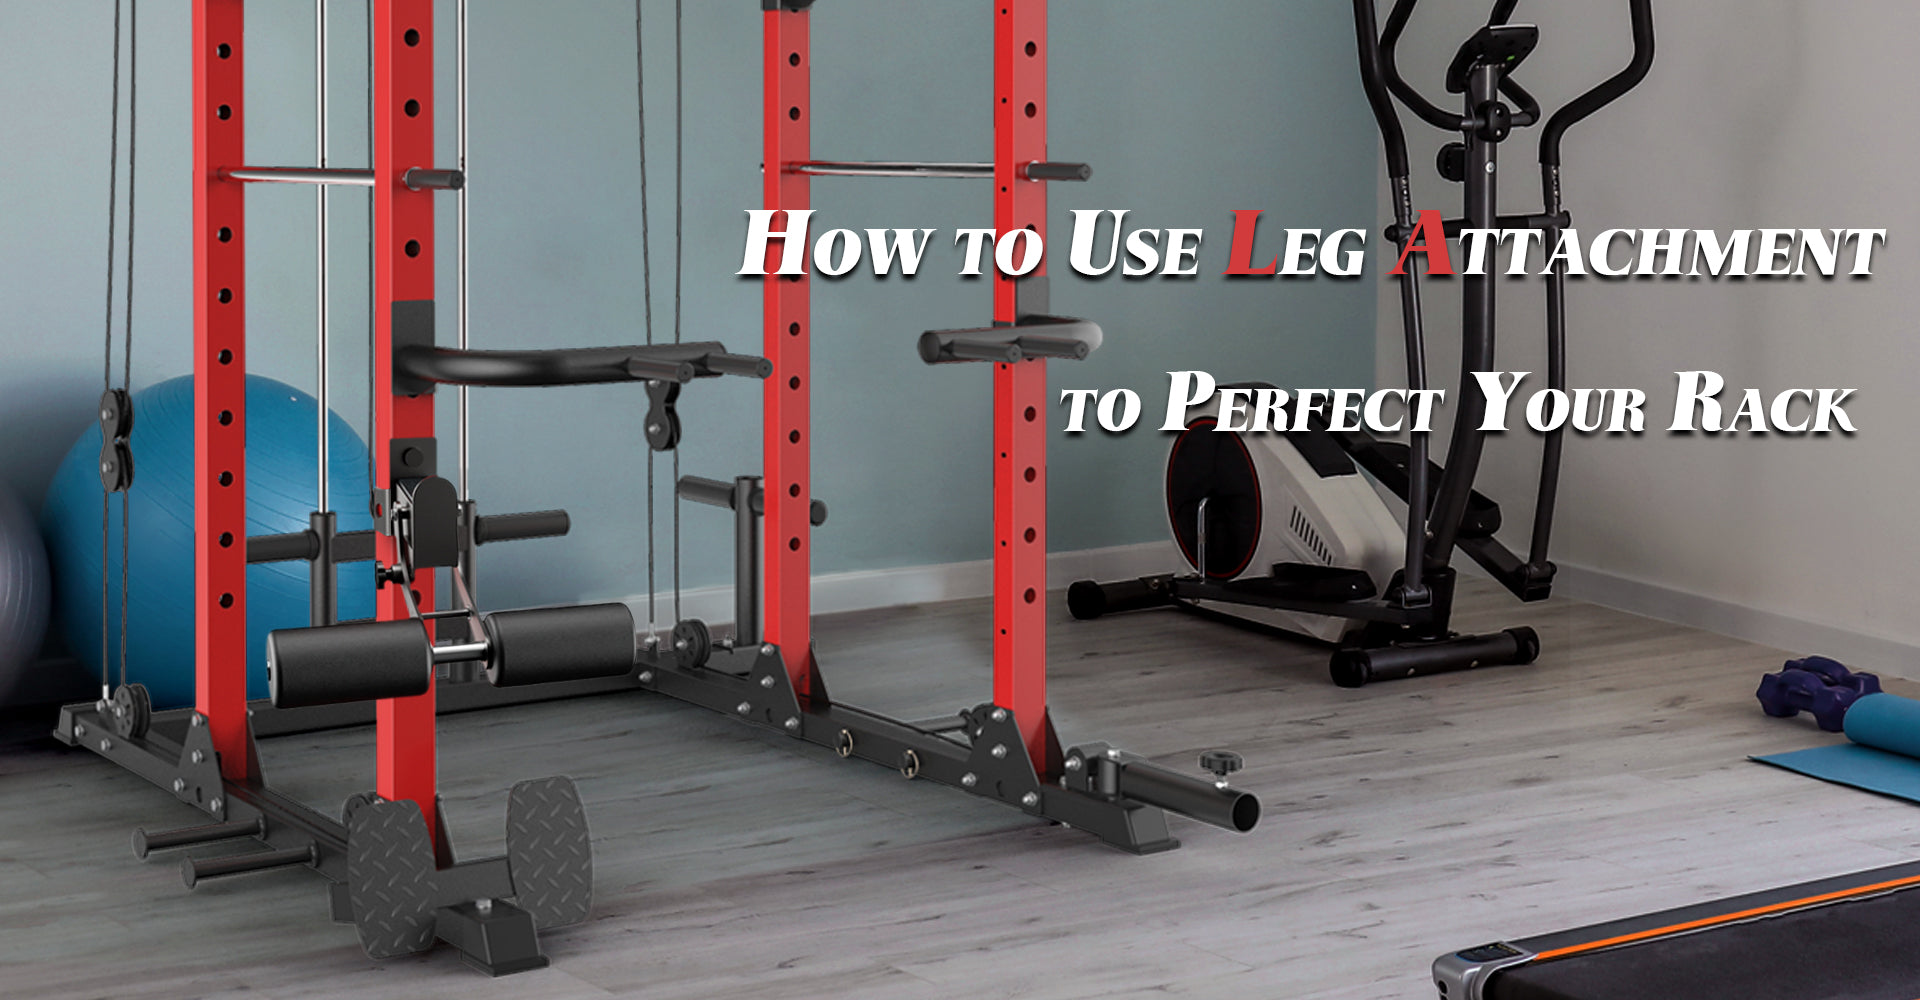 How to Use Leg Attachment to Perfect Your Rack